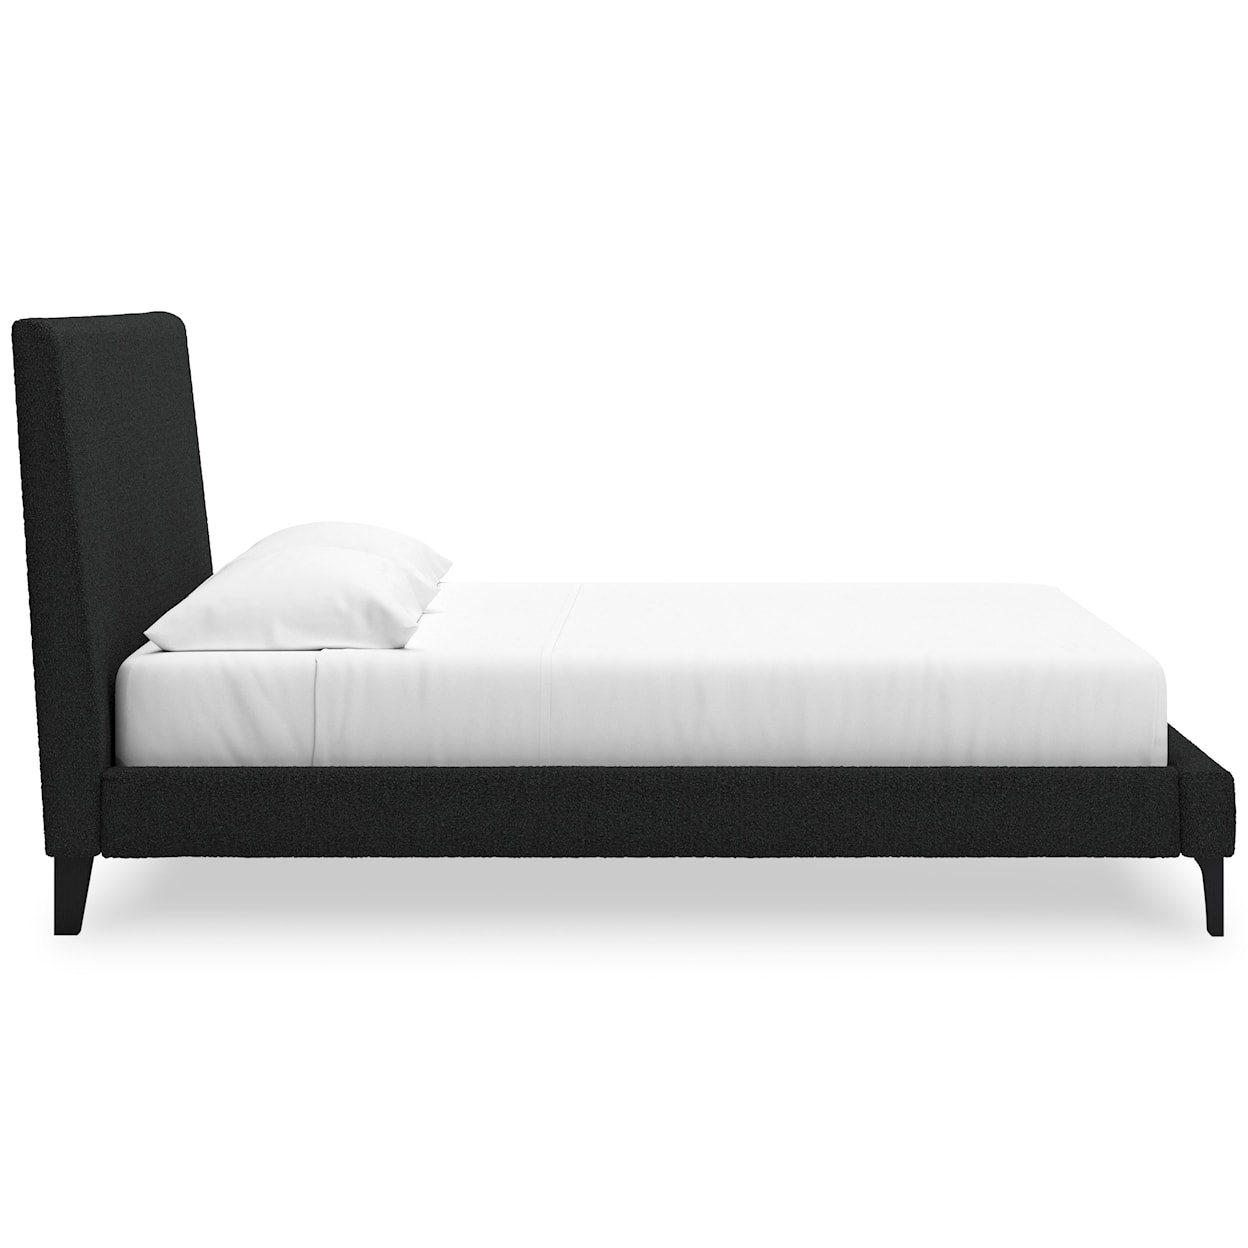 Signature Design by Ashley Cadmori King Upholstered Bed With Roll Slats